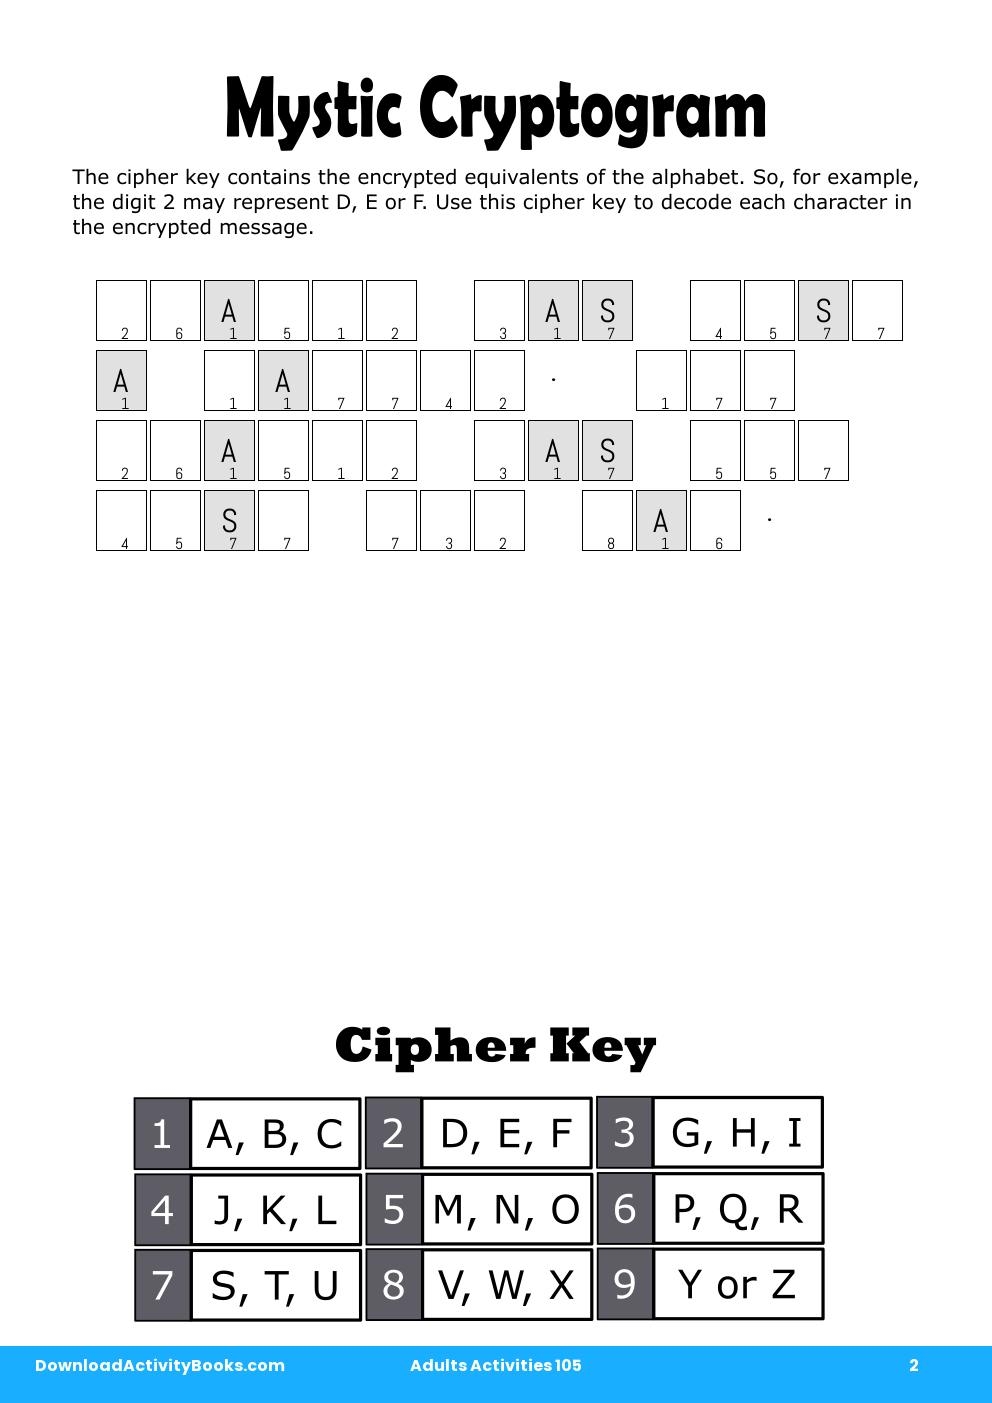 Mystic Cryptogram in Adults Activities 105